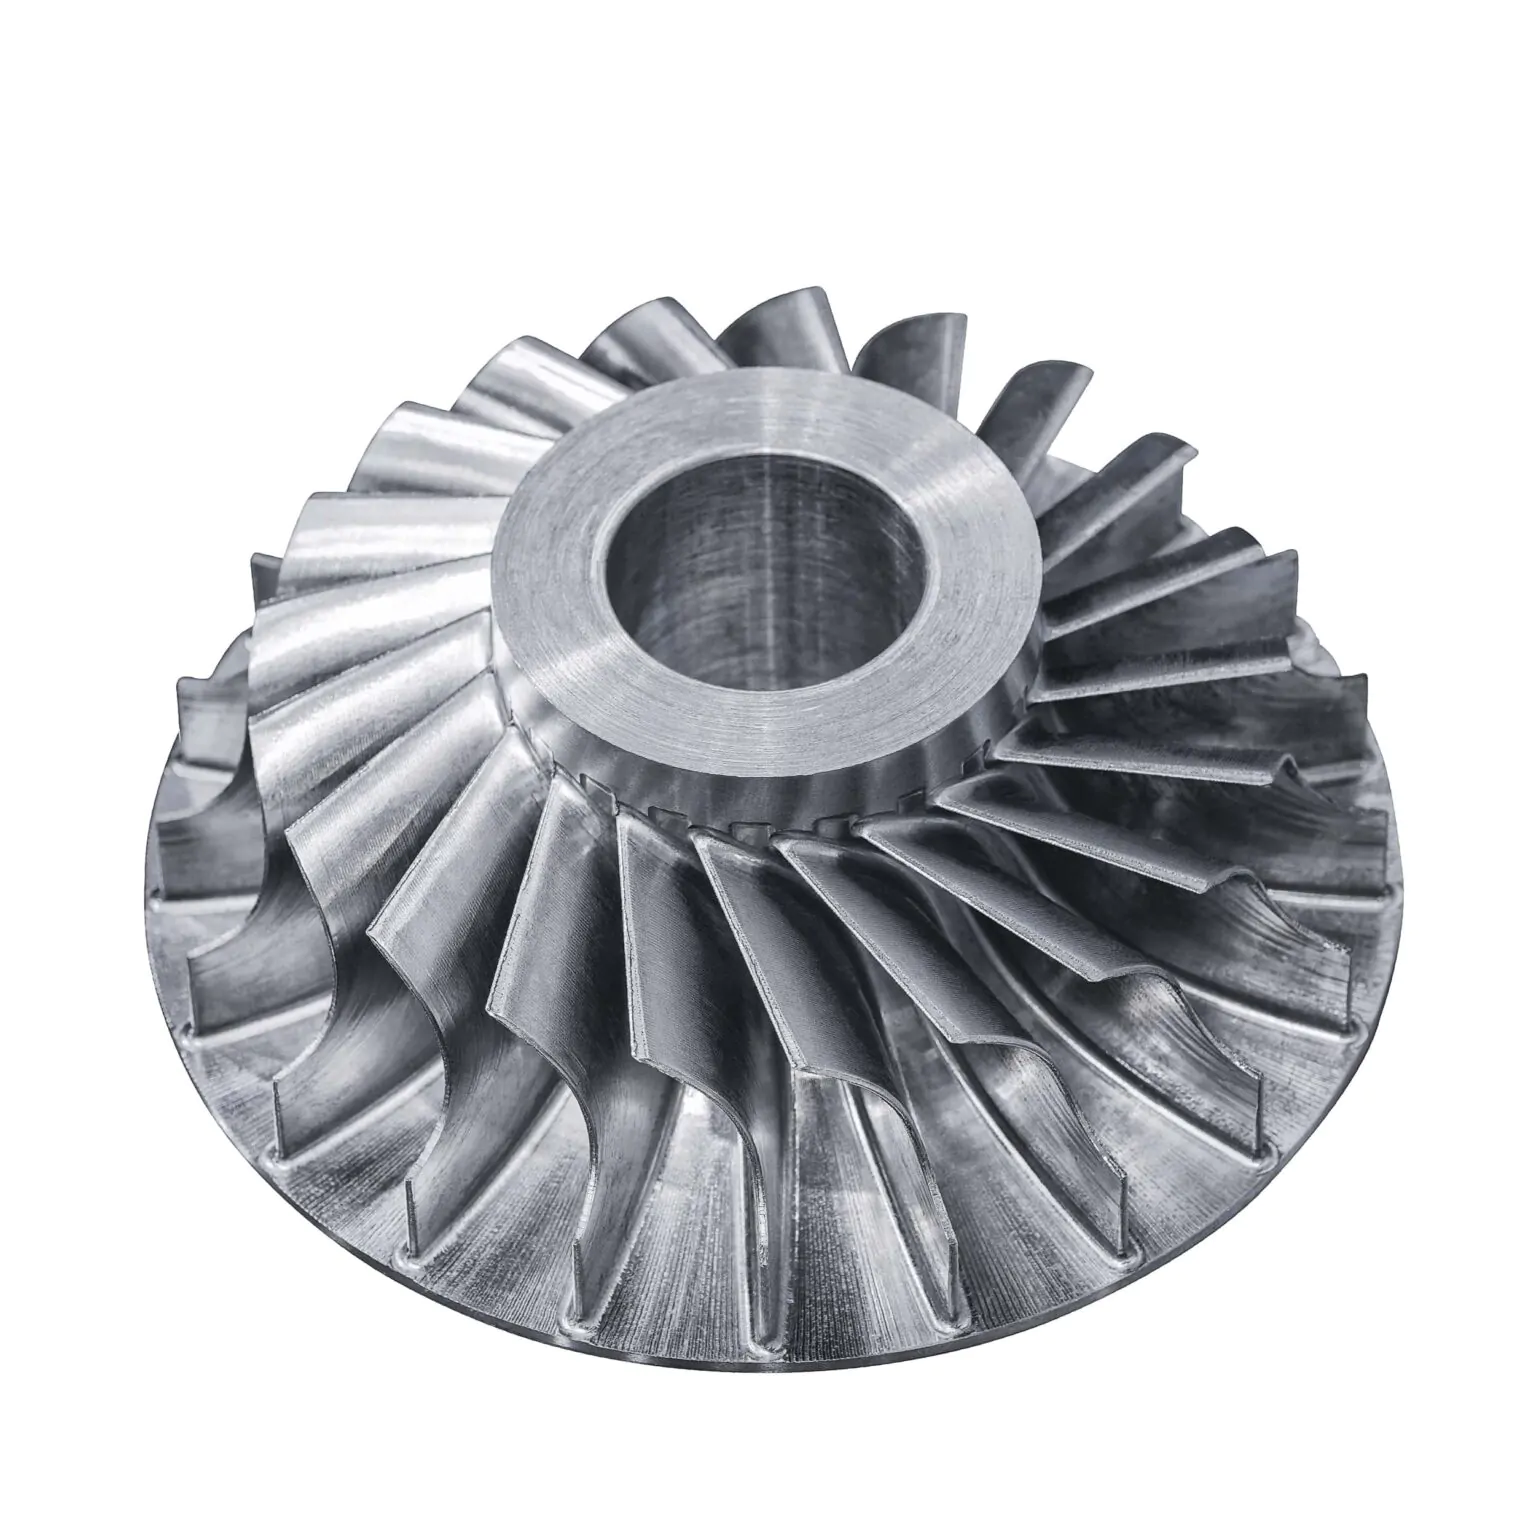 Types of Impeller Centrifugal Pumps